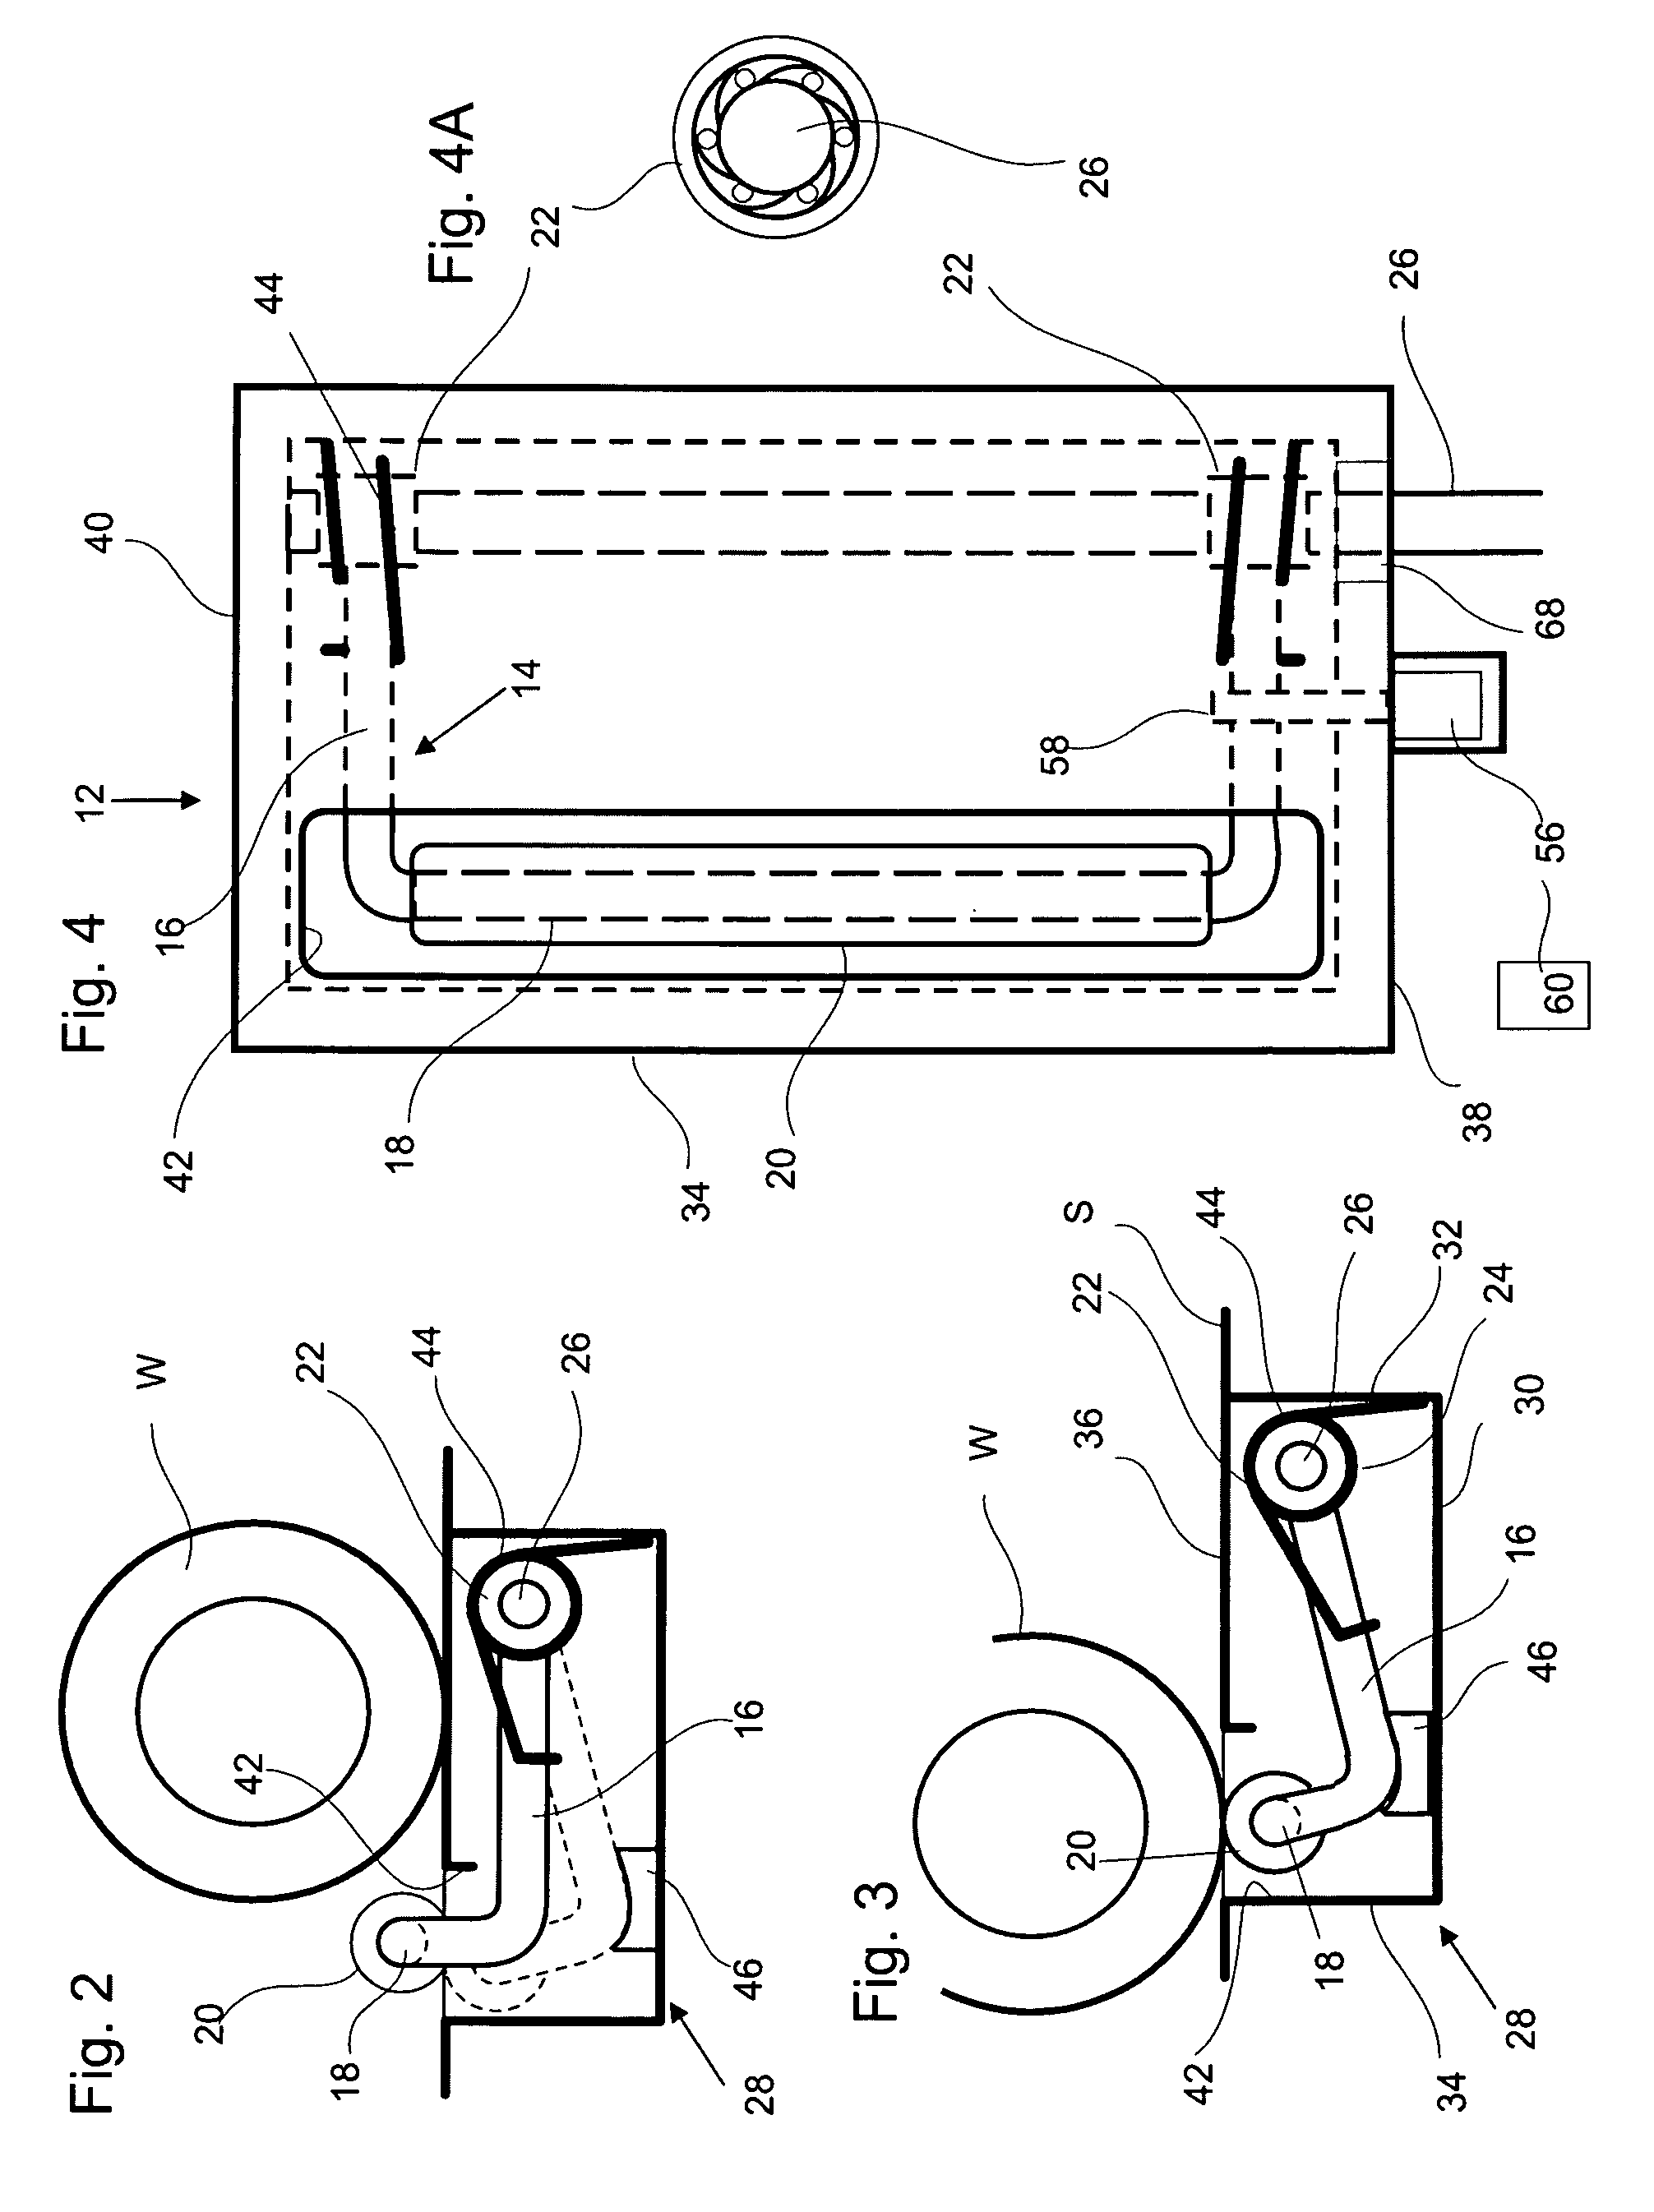 Road vehicle actuated energy device